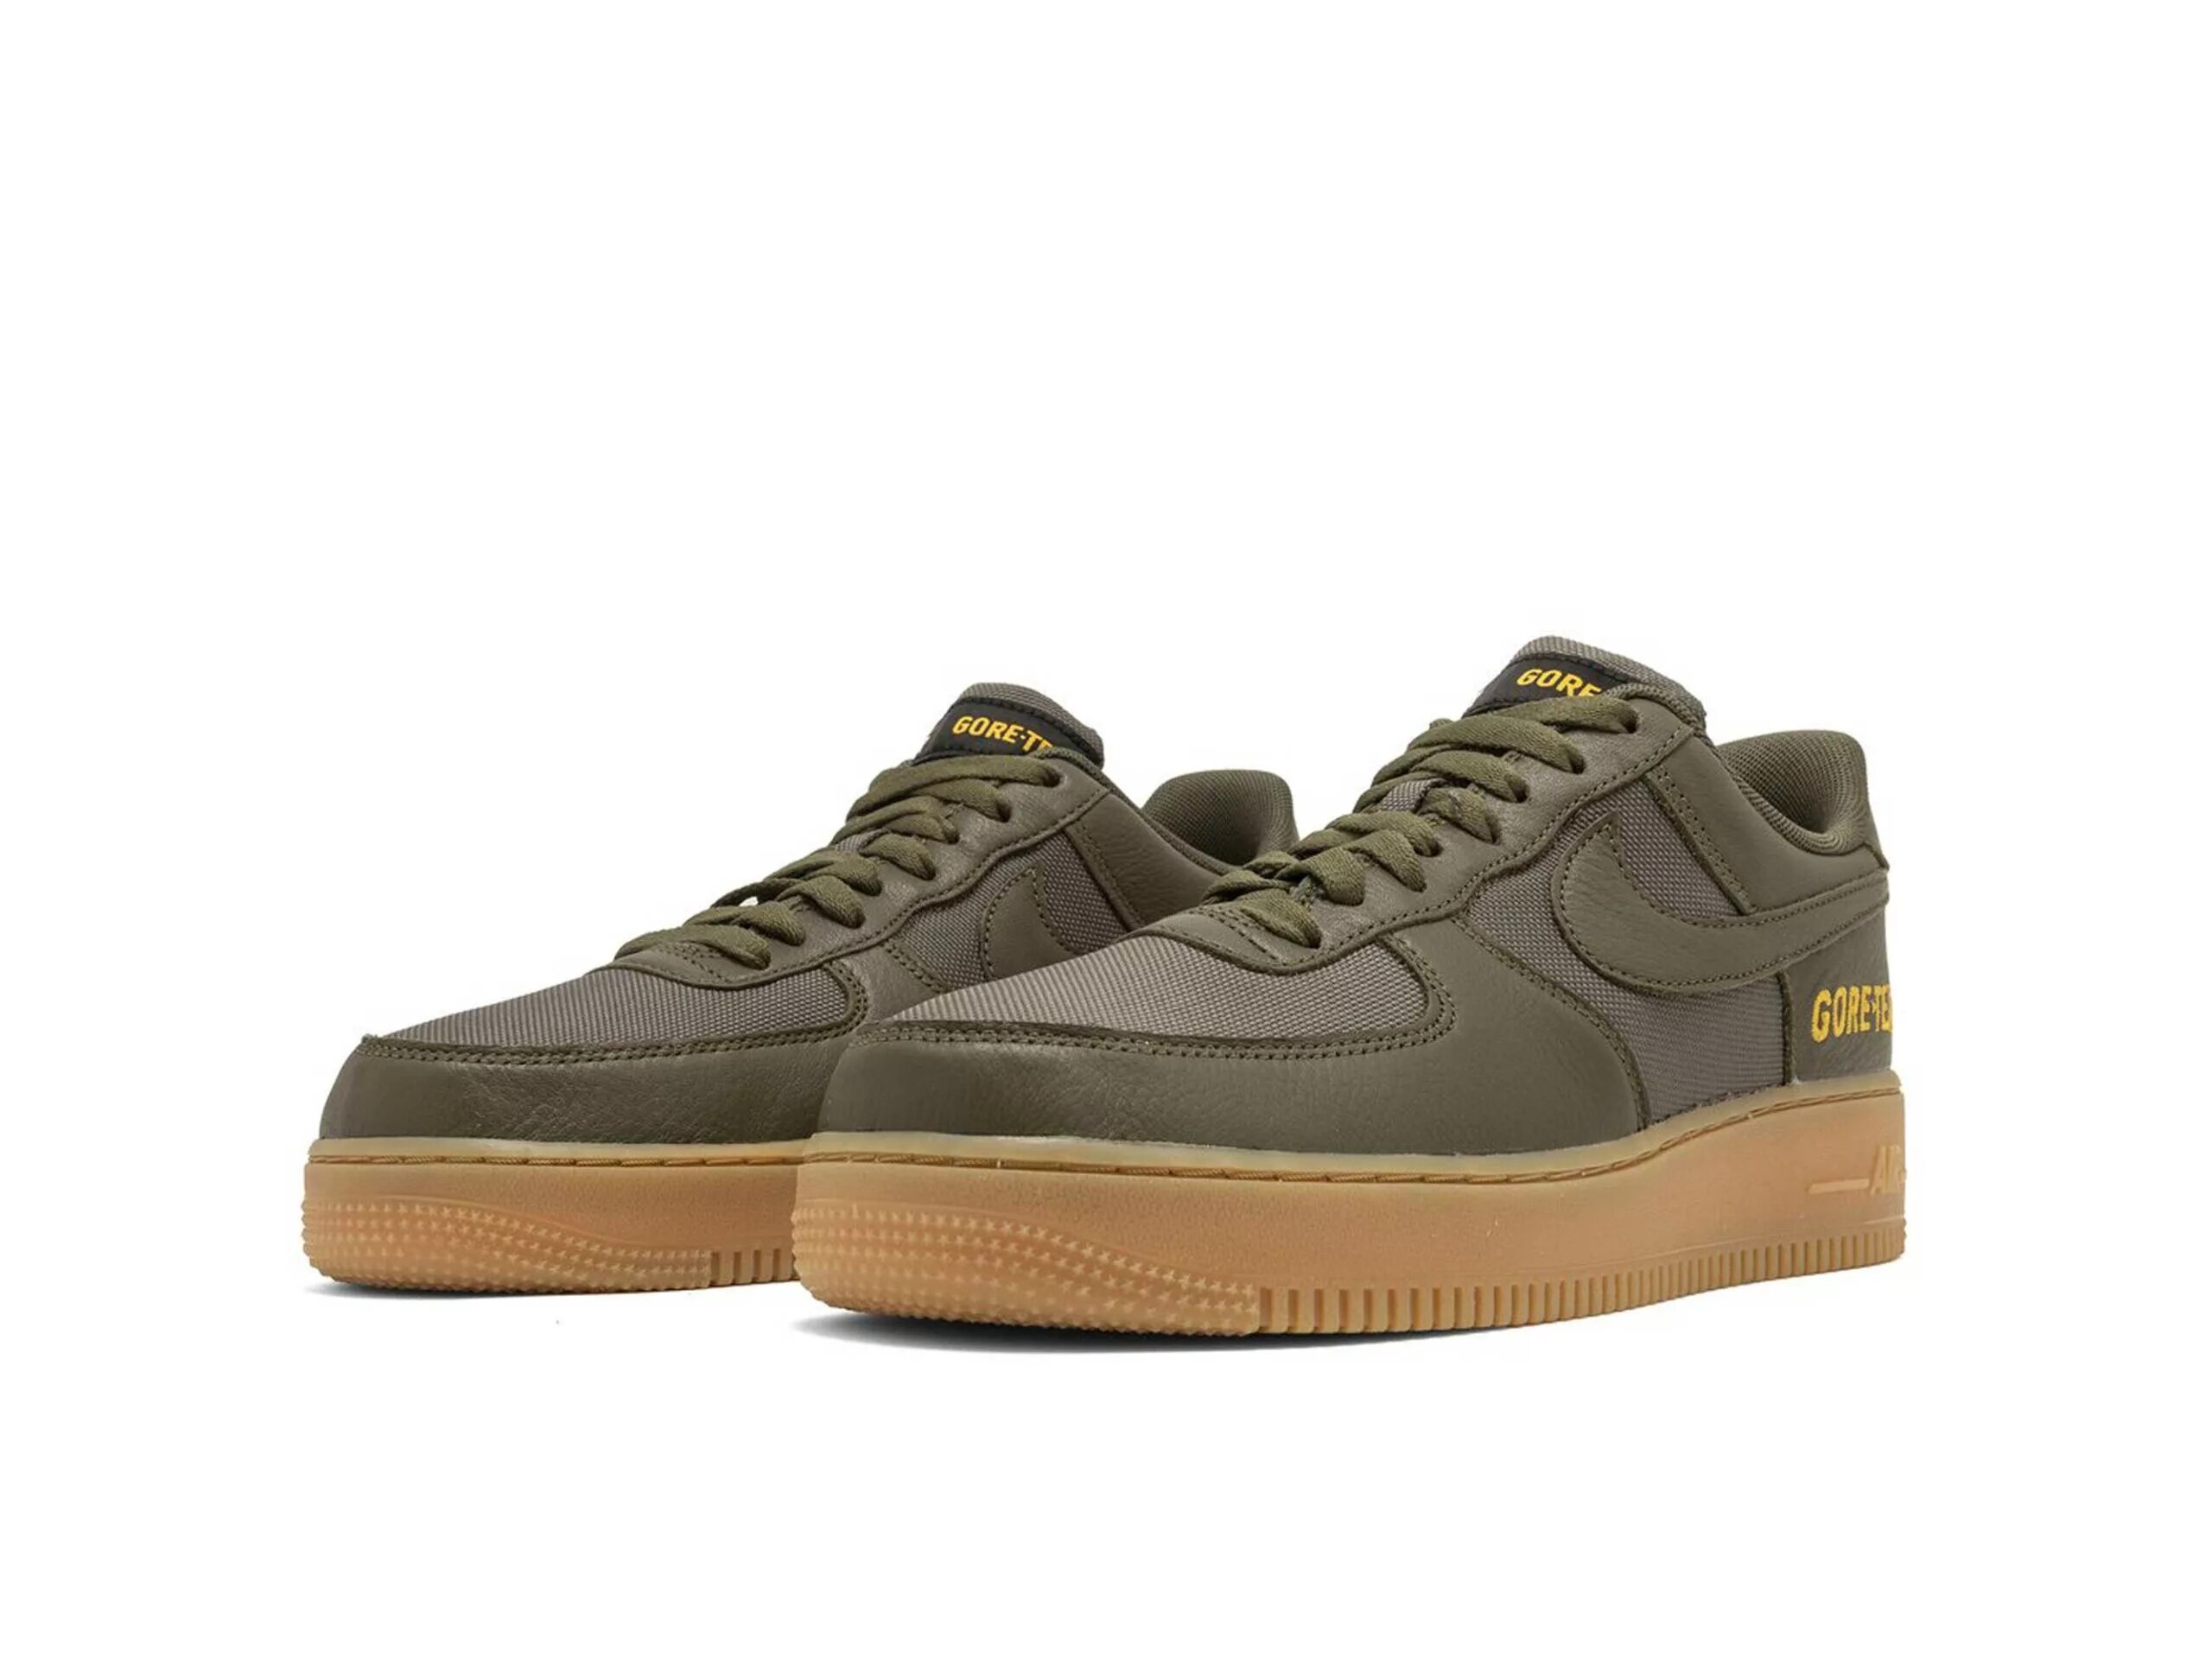 Force first force. Nike Air Force 1 Low Gore-Tex. Nike Force Gore Tex. Nike Air Force 1 Gore-Tex Green. Nike Air Force 1 Green.